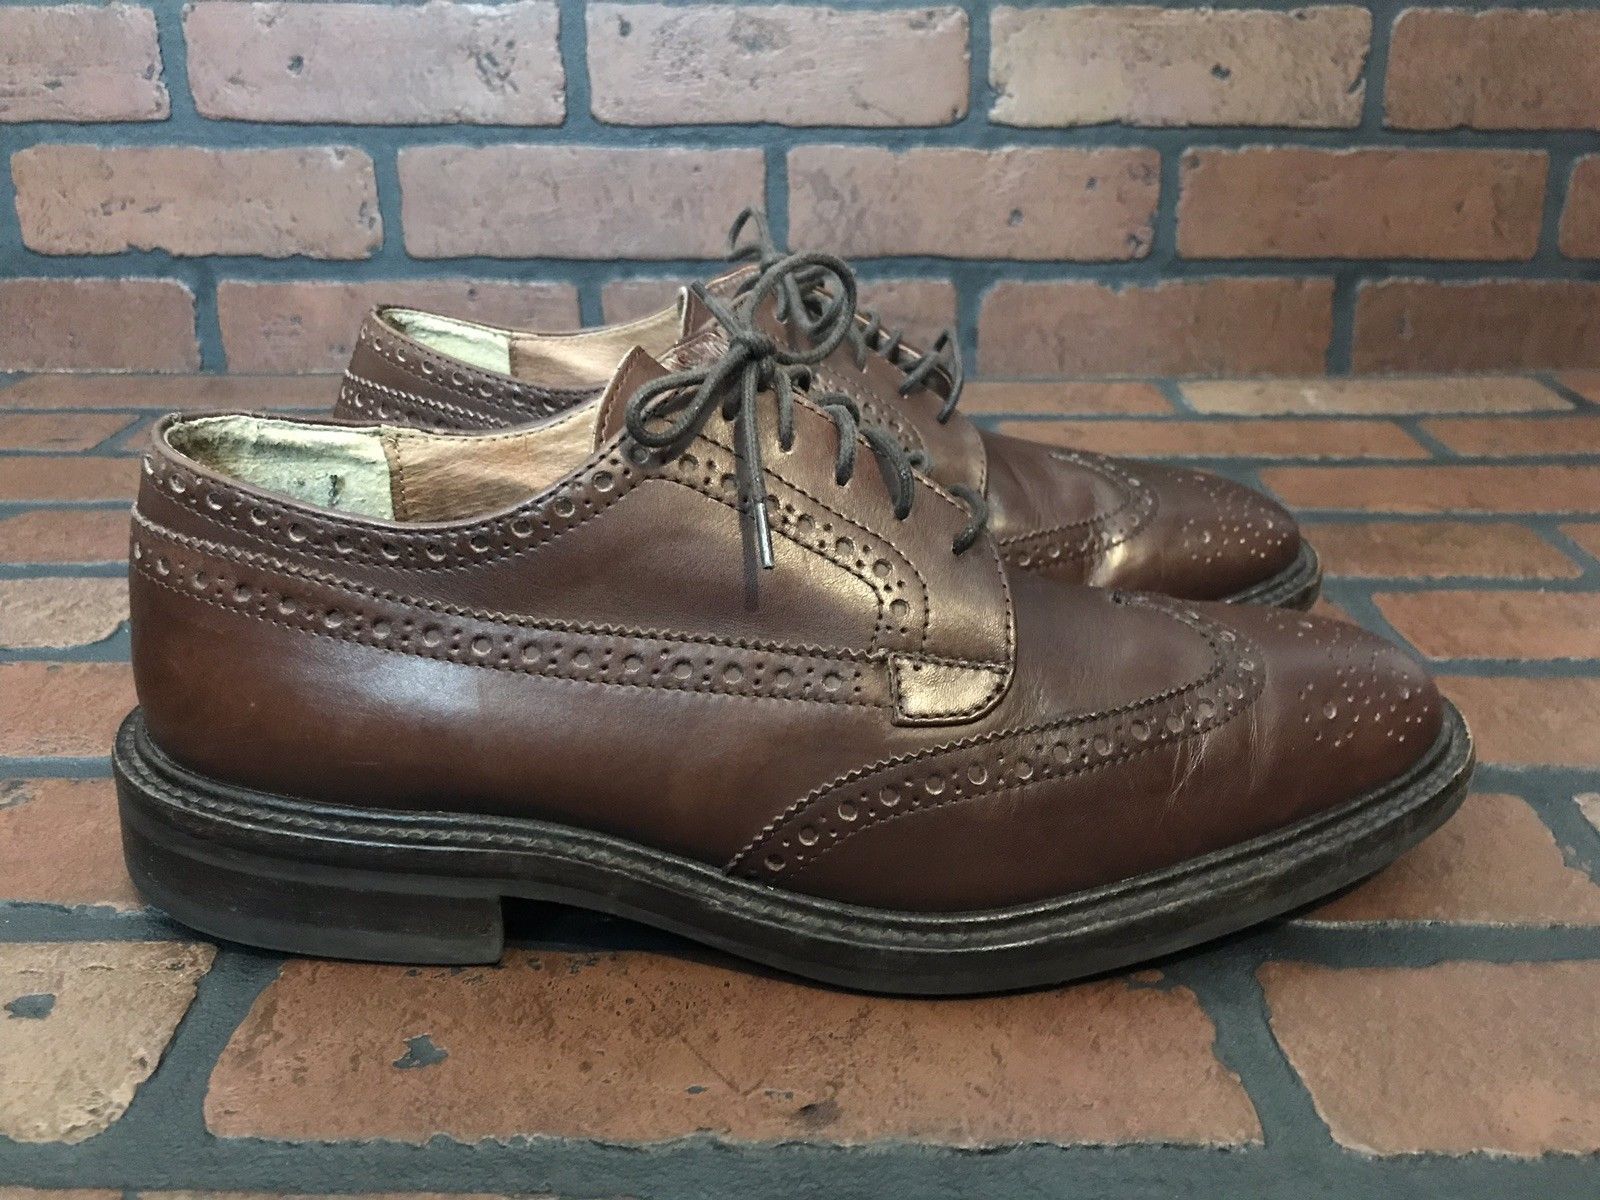 J. Crew Reed Leather Wing Tips Oxford Brown Size 10 - $70.43